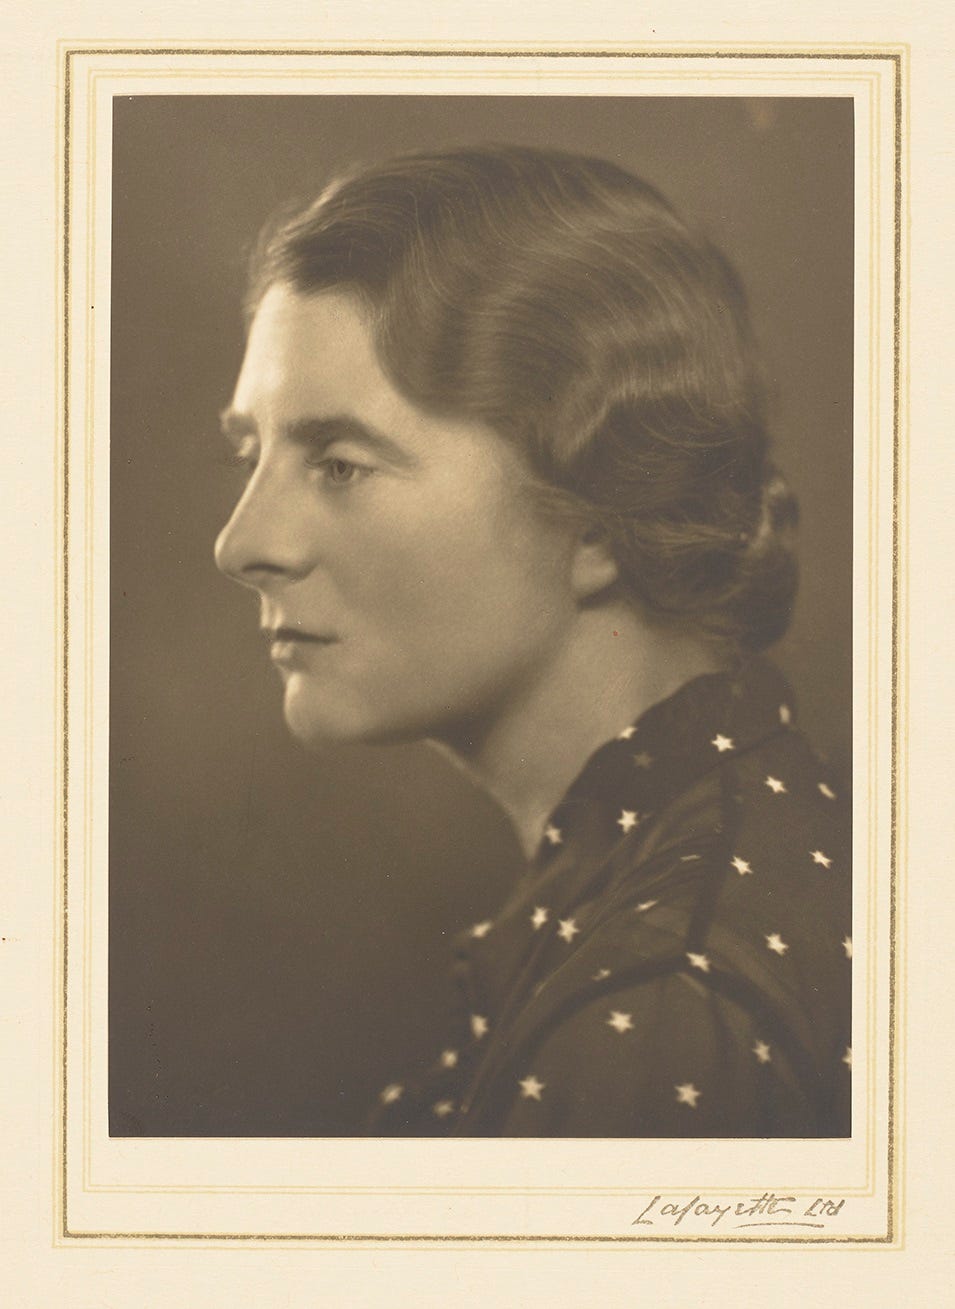 Studio portrait photograph of Margaret Pilkington in profile wearing a blouse decorated with stars, c.1930s